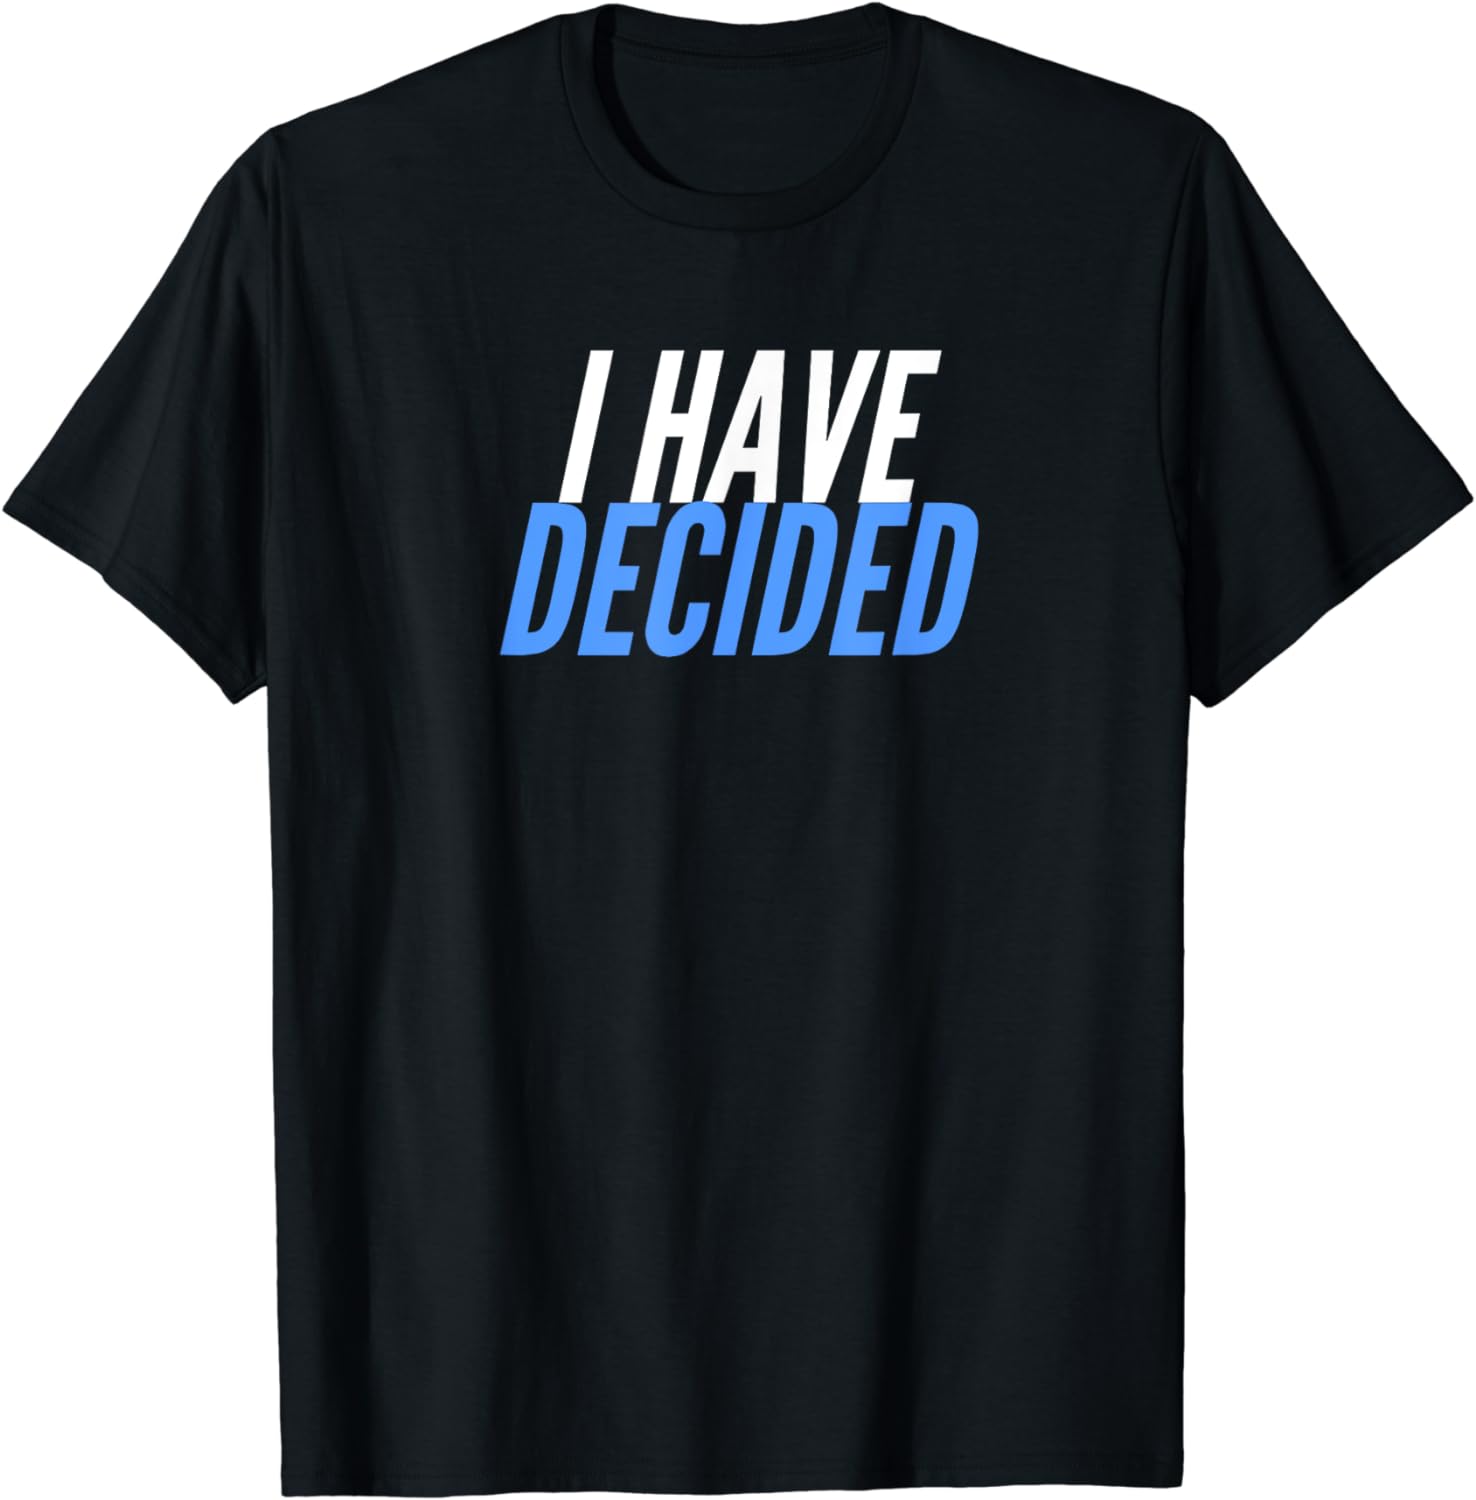 Shirts For Church Groups